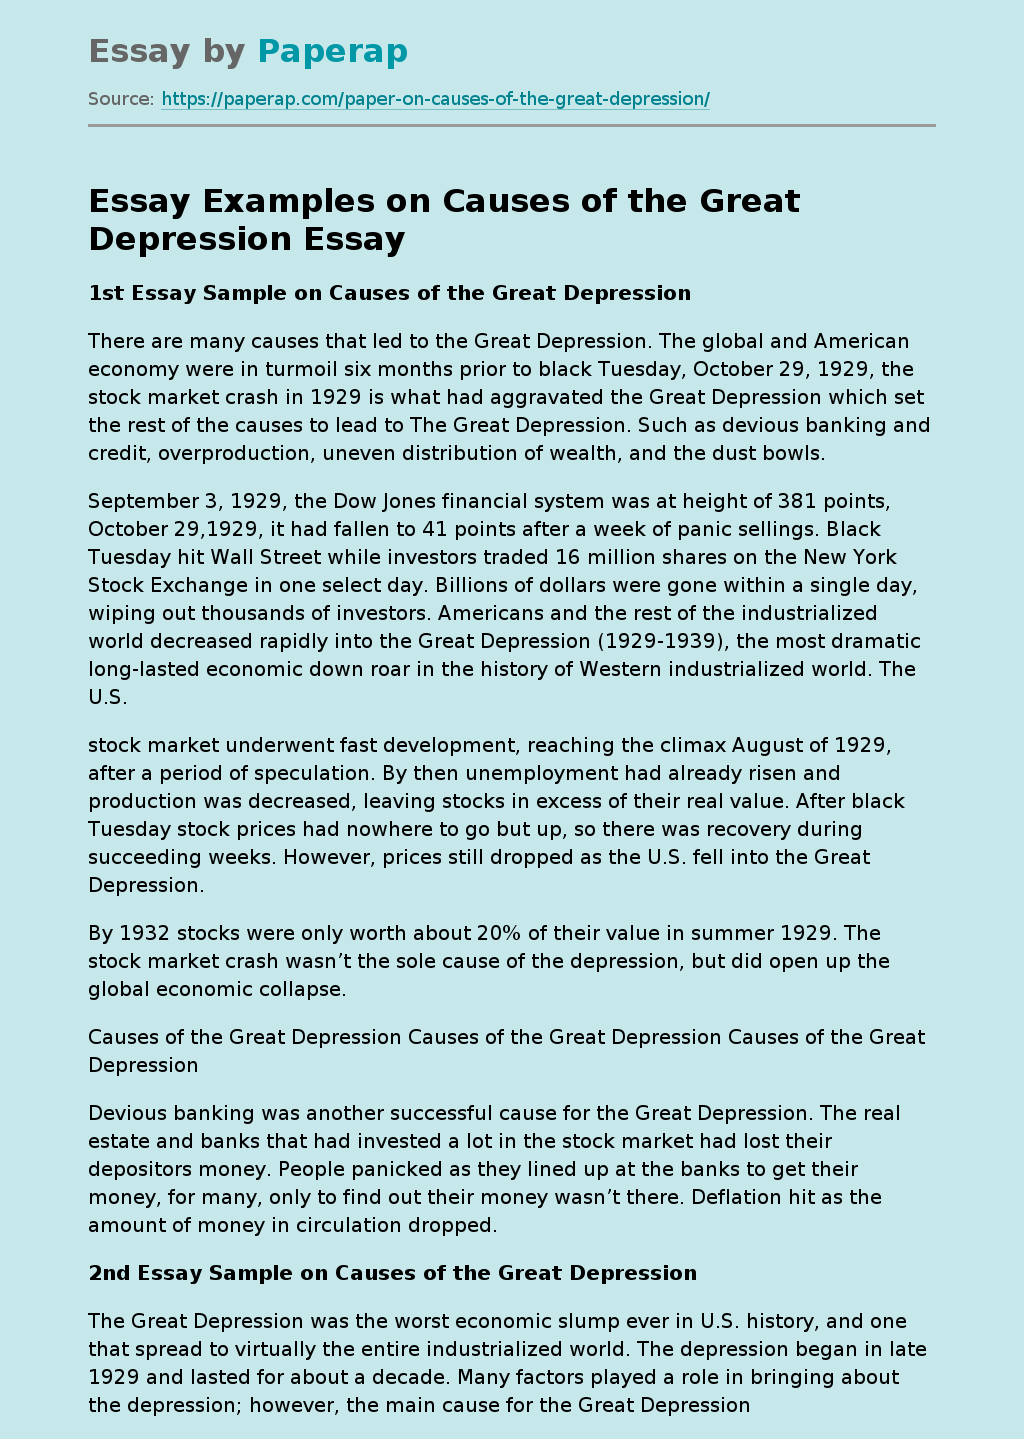 Essay Examples on Causes of the Great Depression